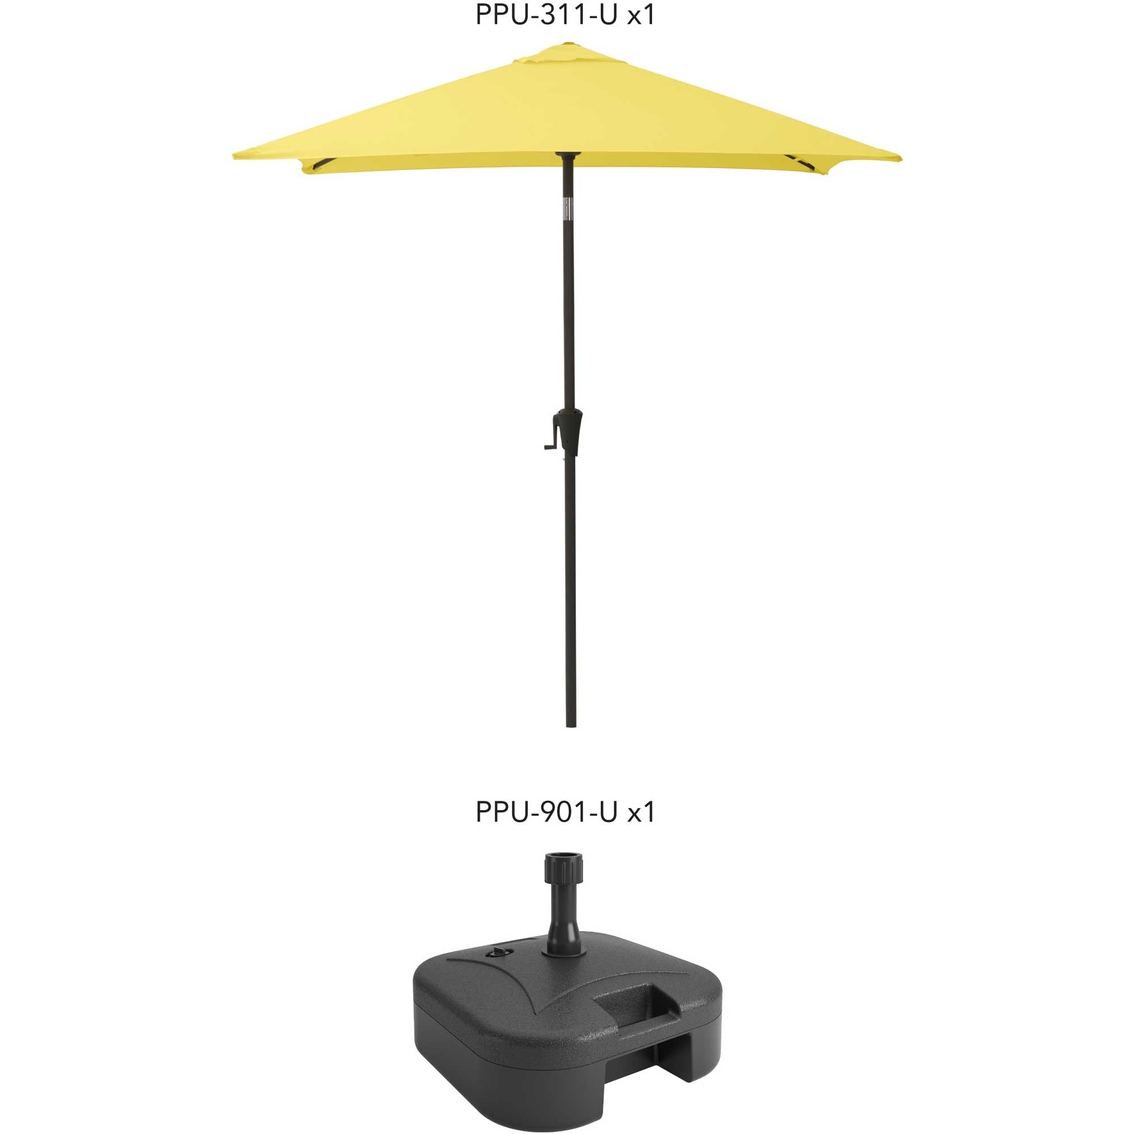 CorLiving 9 ft. Square Tilt Patio Umbrella with Base - Image 2 of 5